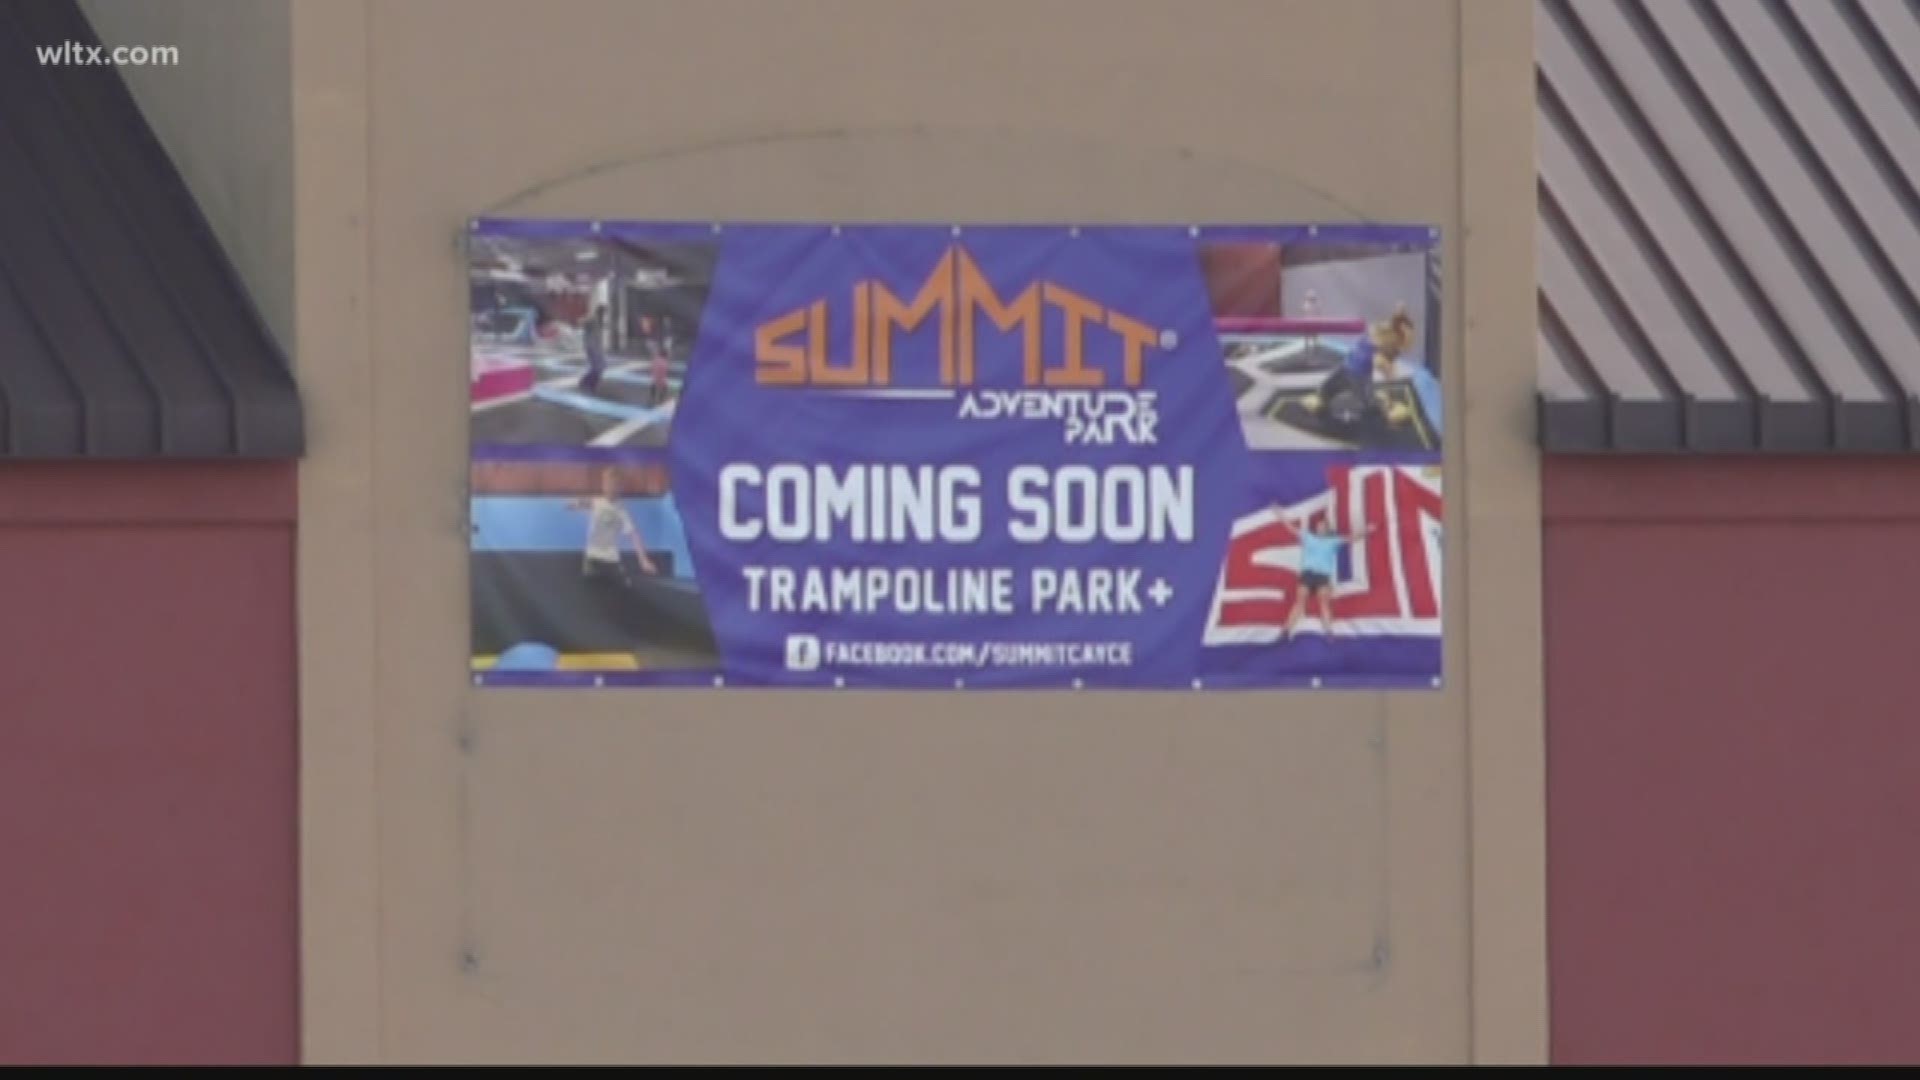 Summit Adventure Park will be coming to this shopping center off Charleston Highway.
This is the same area that includes Dollar Tree and Pizza Hut.